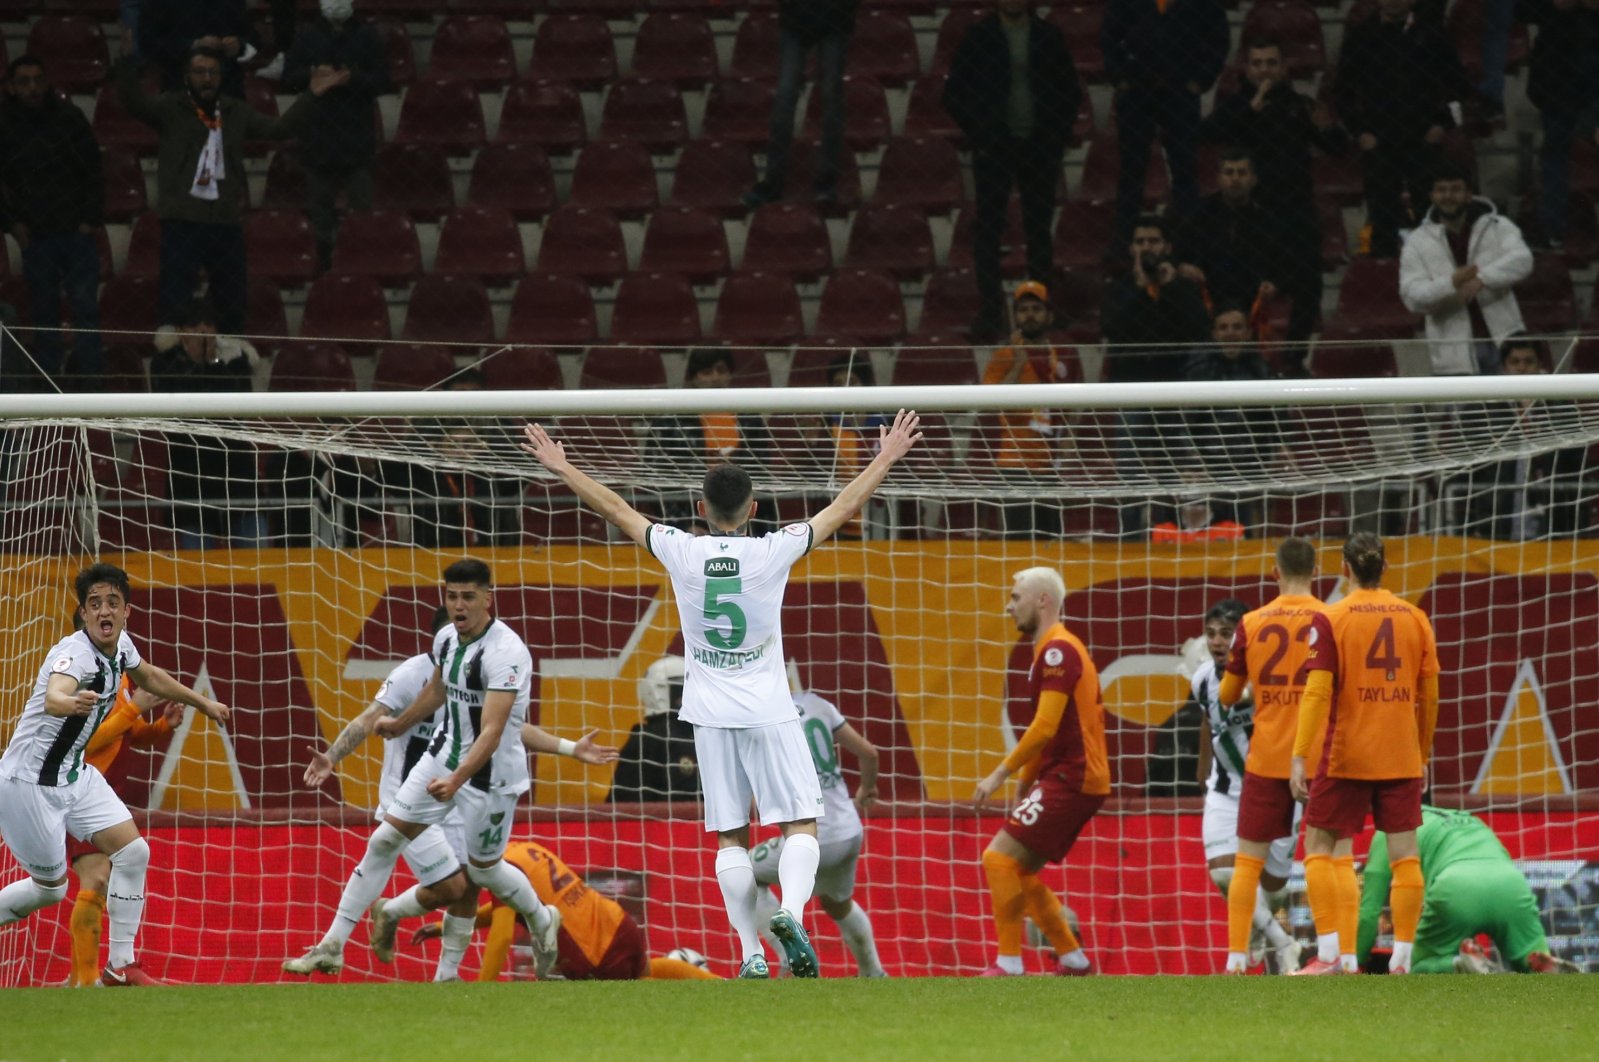 Denizlispor players, in white and green jerseys, celebrate while Galatasaray players look dejected after the Ziraat Turkish Cup match in Istanbul, Turkey, Dec. 28, 2021. (DHA Photo)